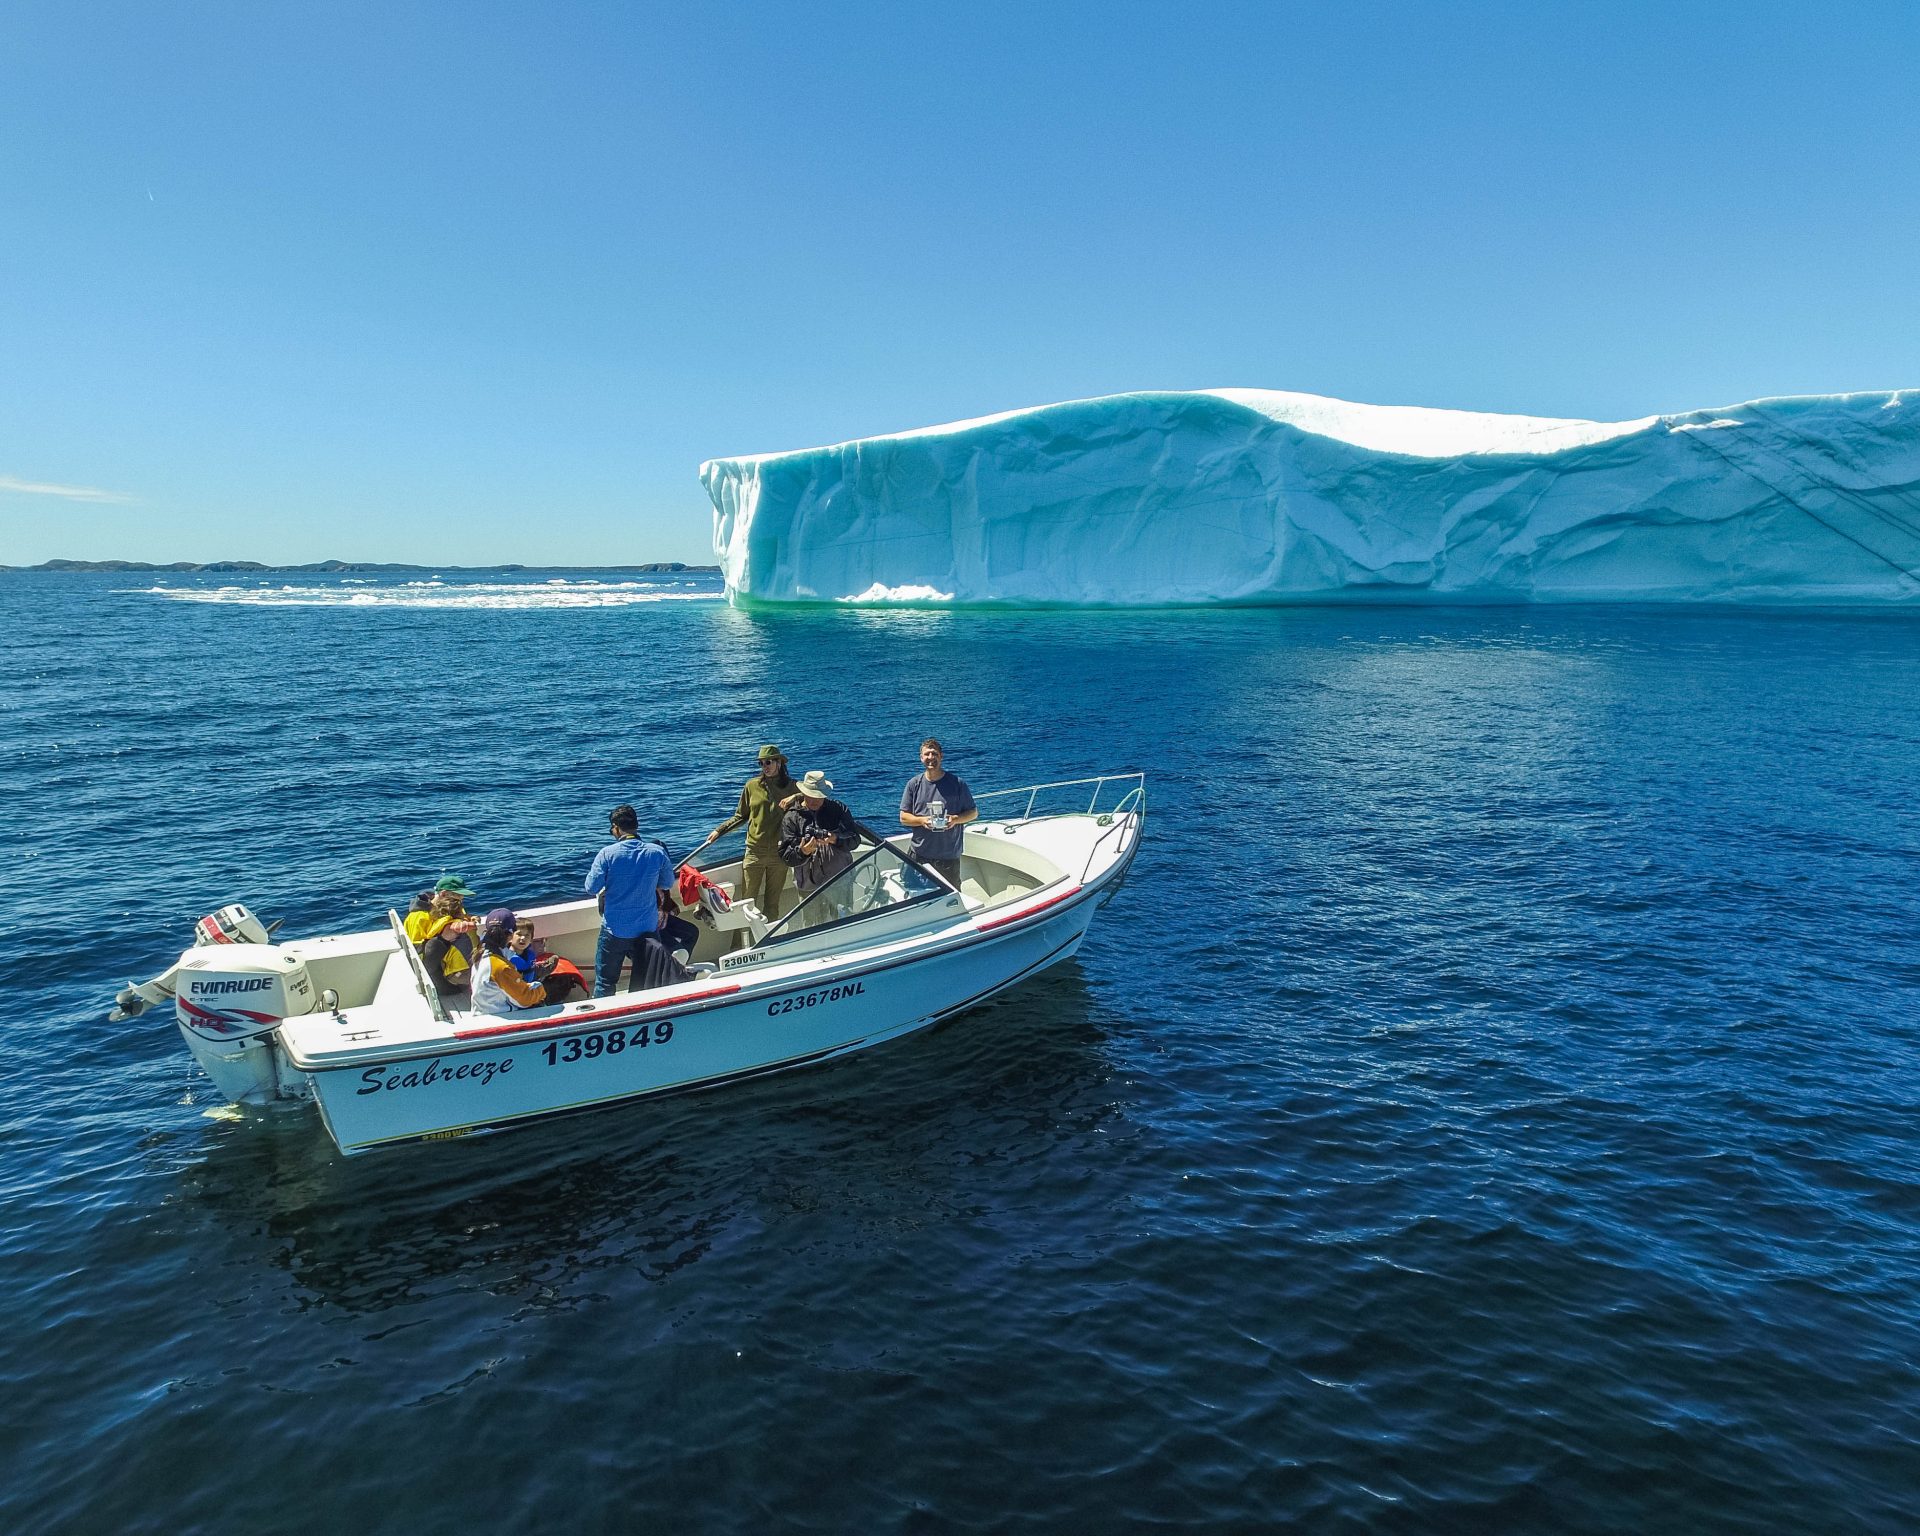 A small boat of tourists photographs a large iceberg in Twillingate, Newfoundland - Icebergs in Twillingate